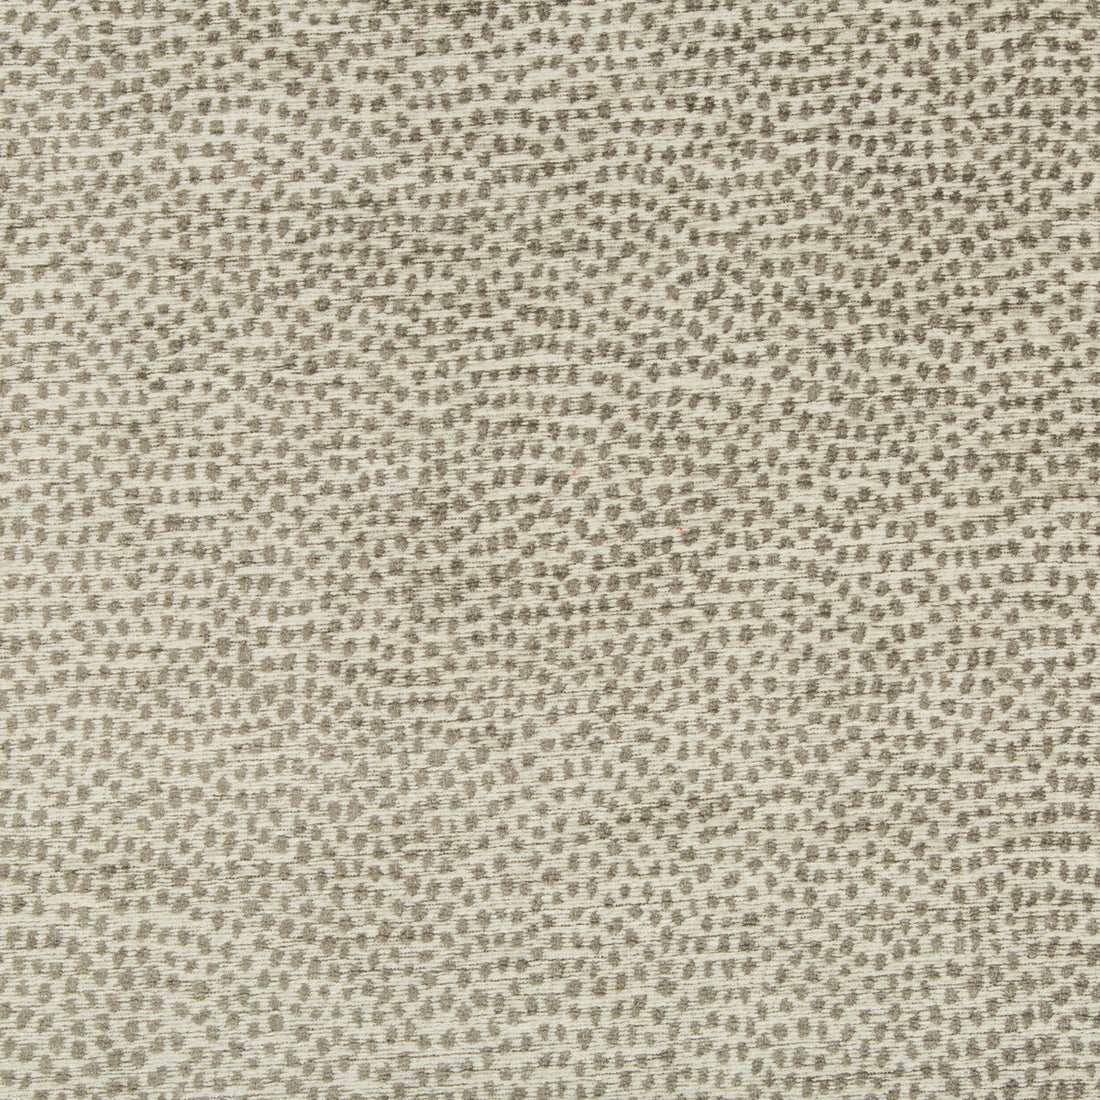 Kravet Design fabric in 34971-11 color - pattern 34971.11.0 - by Kravet Design in the Performance Crypton Home collection